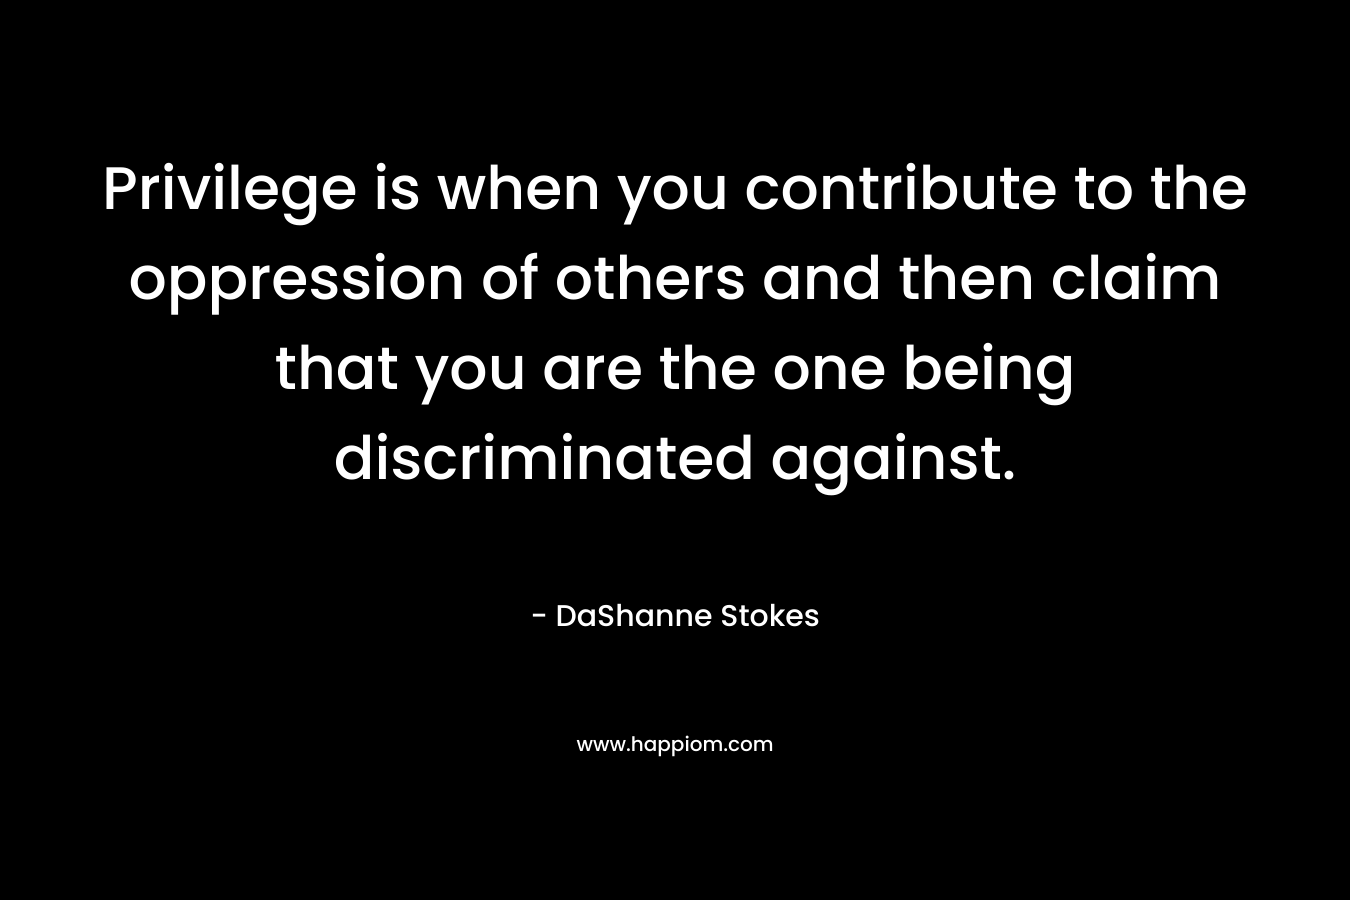 Privilege is when you contribute to the oppression of others and then claim that you are the one being discriminated against.